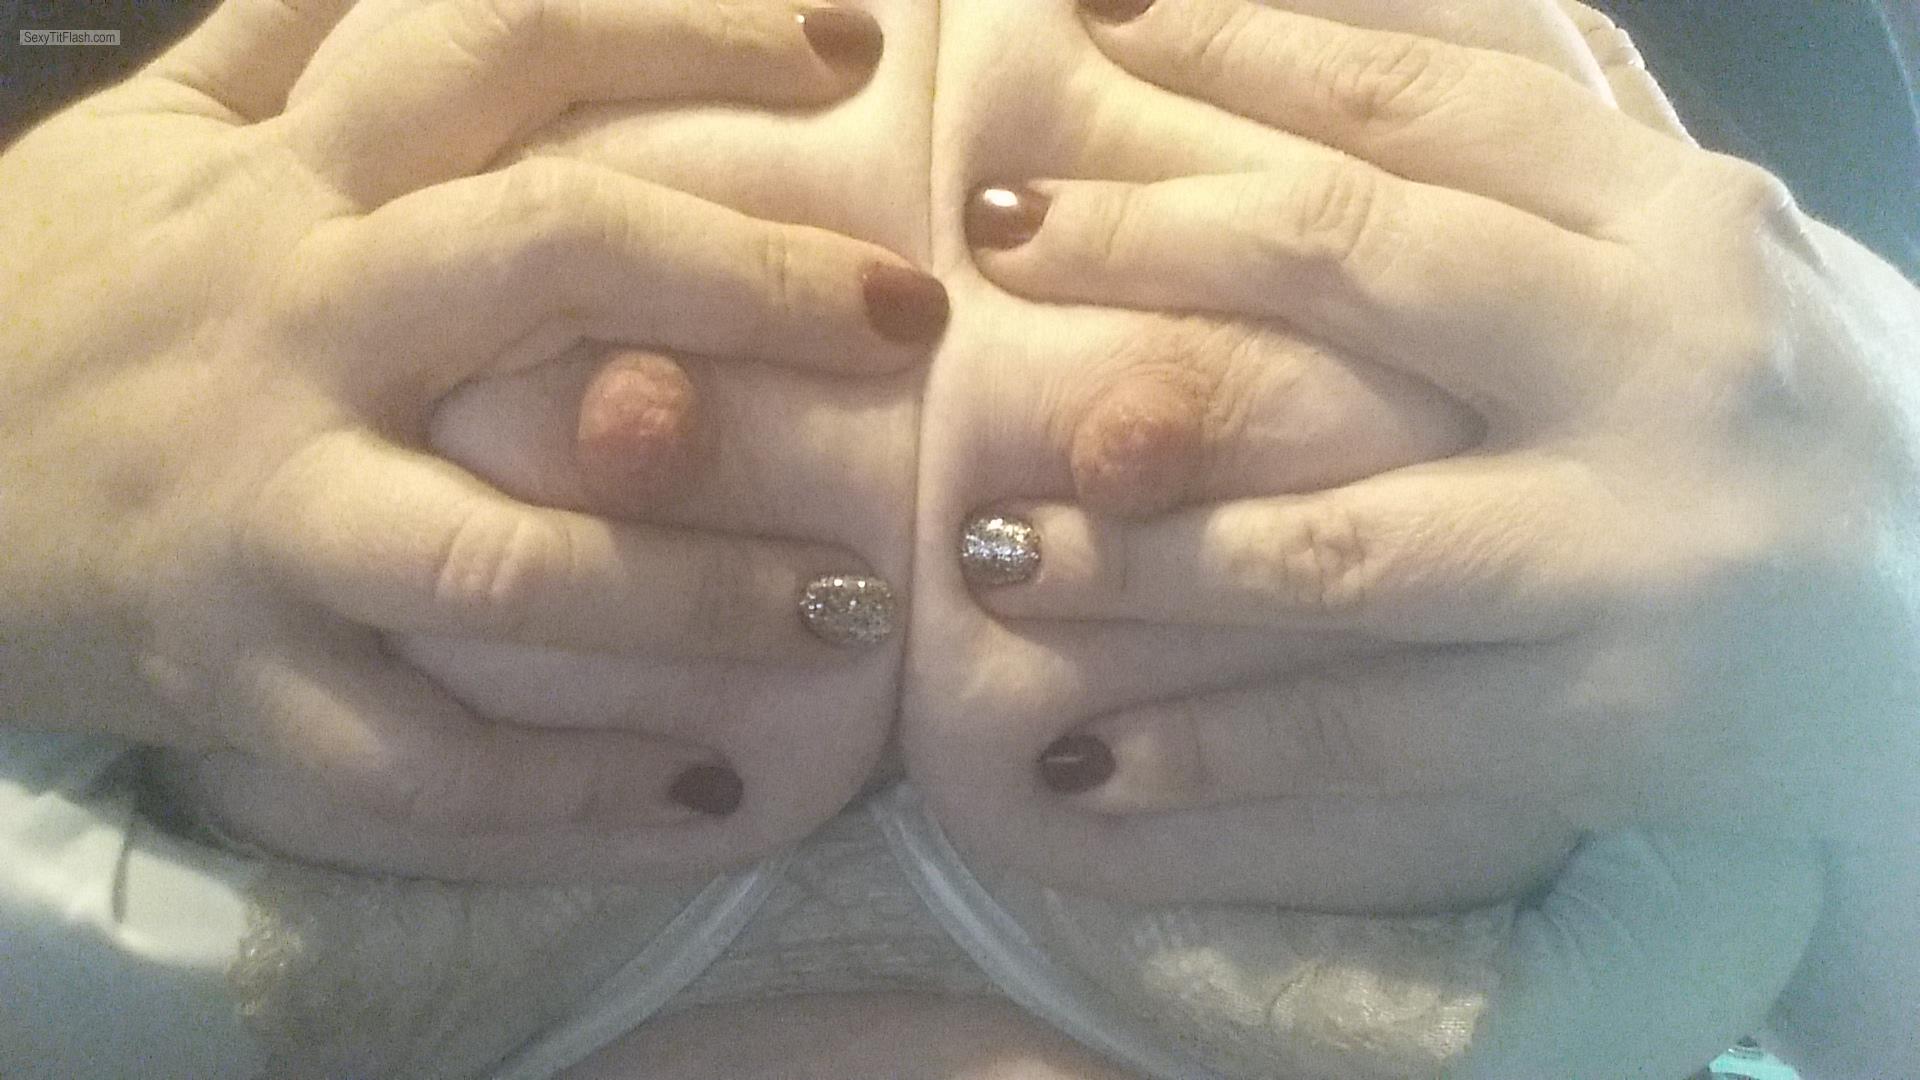 Tit Flash: My Extremely Big Tits (Selfie) - Jennifire from United States